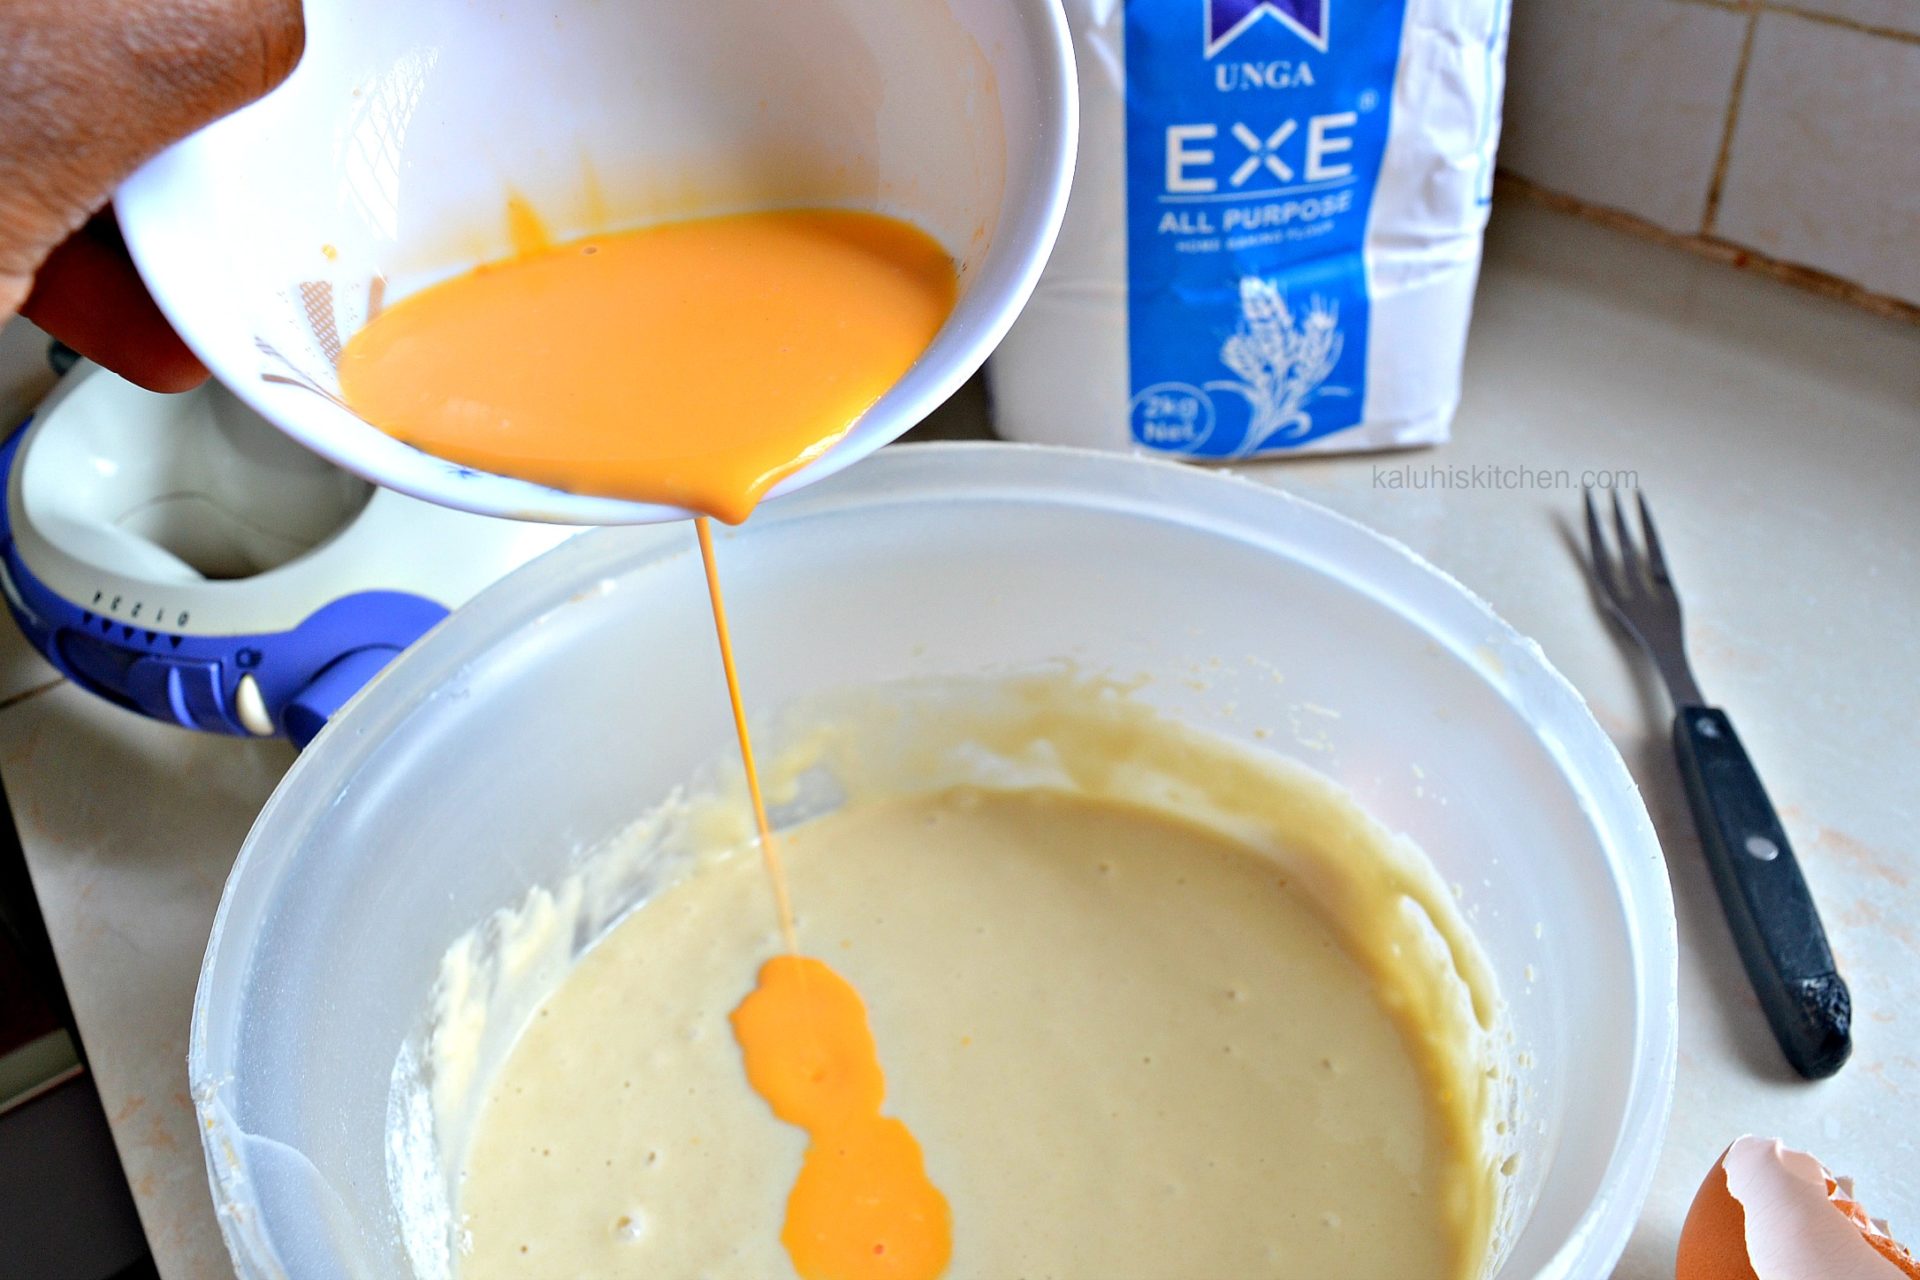 mix the custard with some milk before adidng it to the pancake batter so as to avoid any lumps_kaluhiskitchen.com